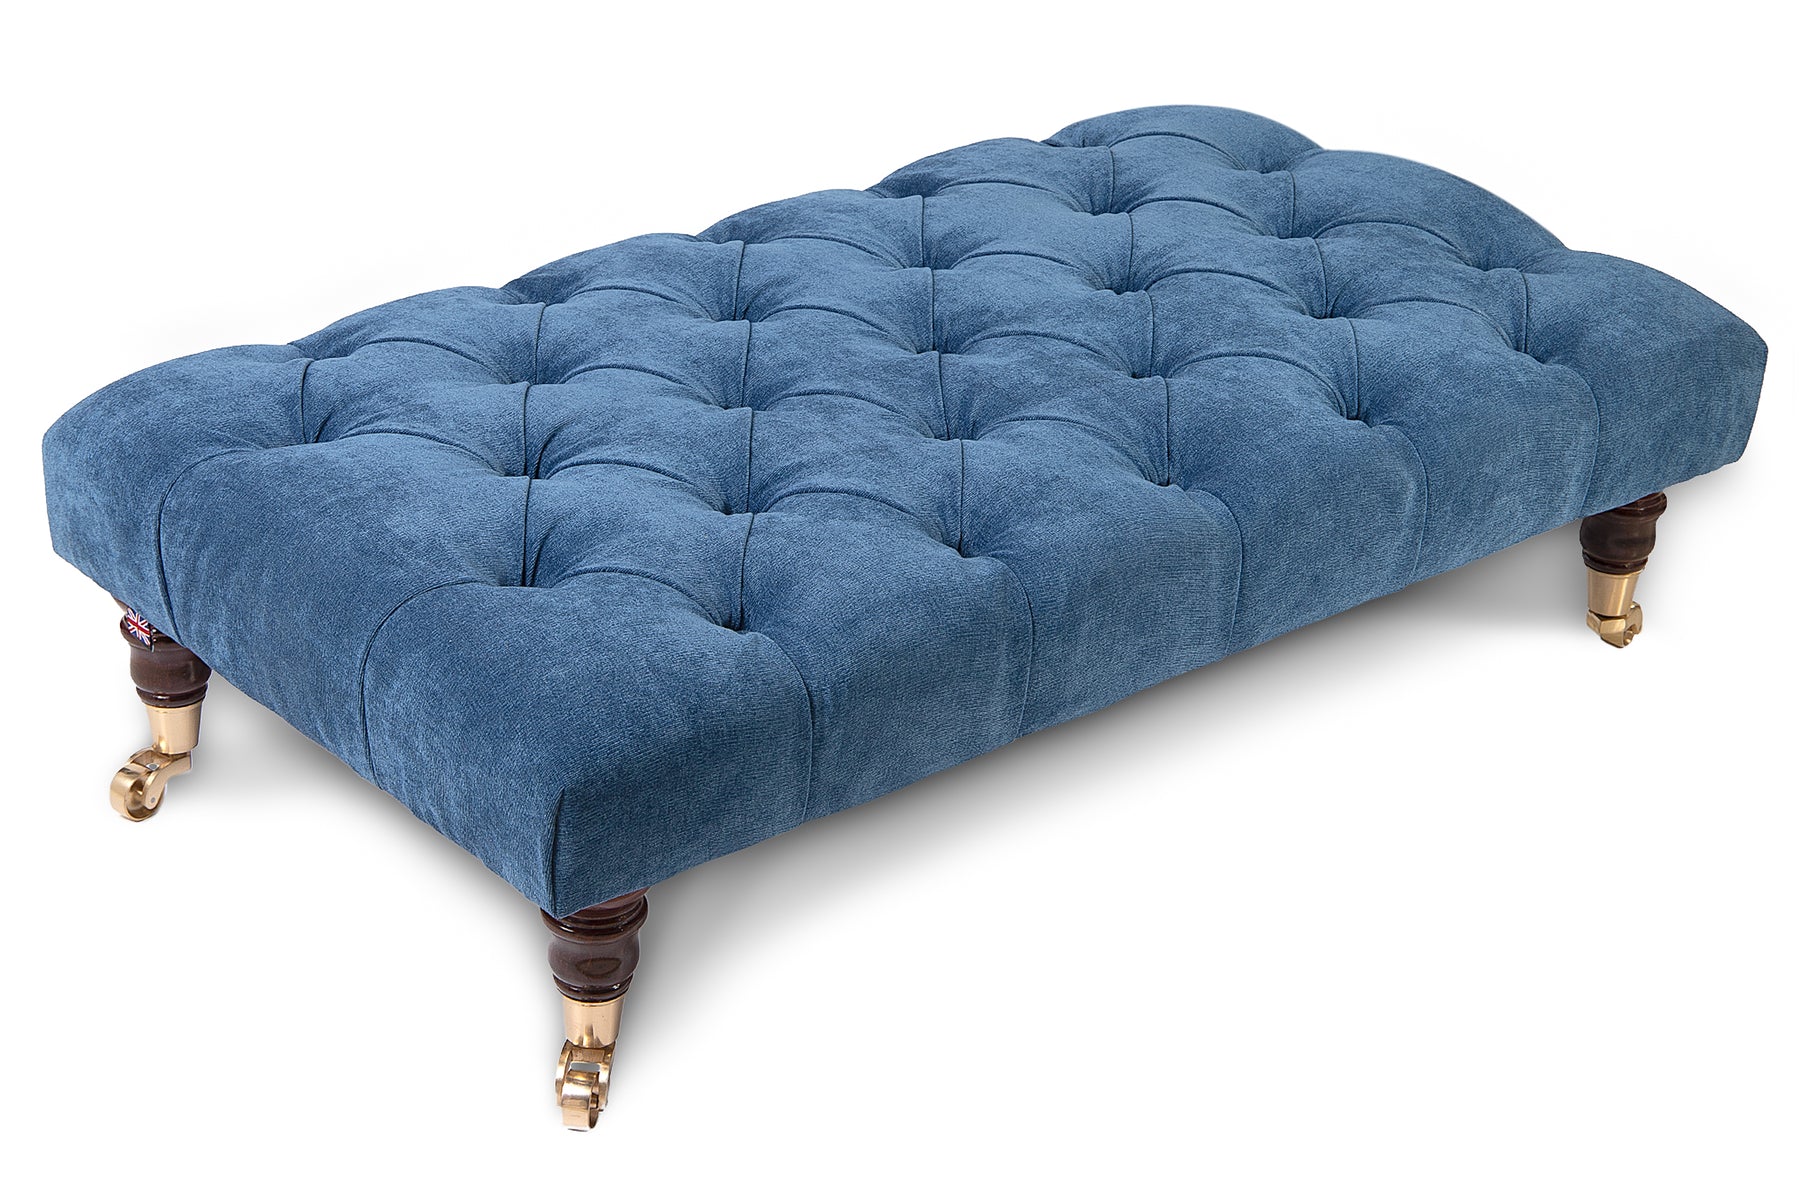 Bleu Chesterfield Upholstered Footstool / Coffee Table